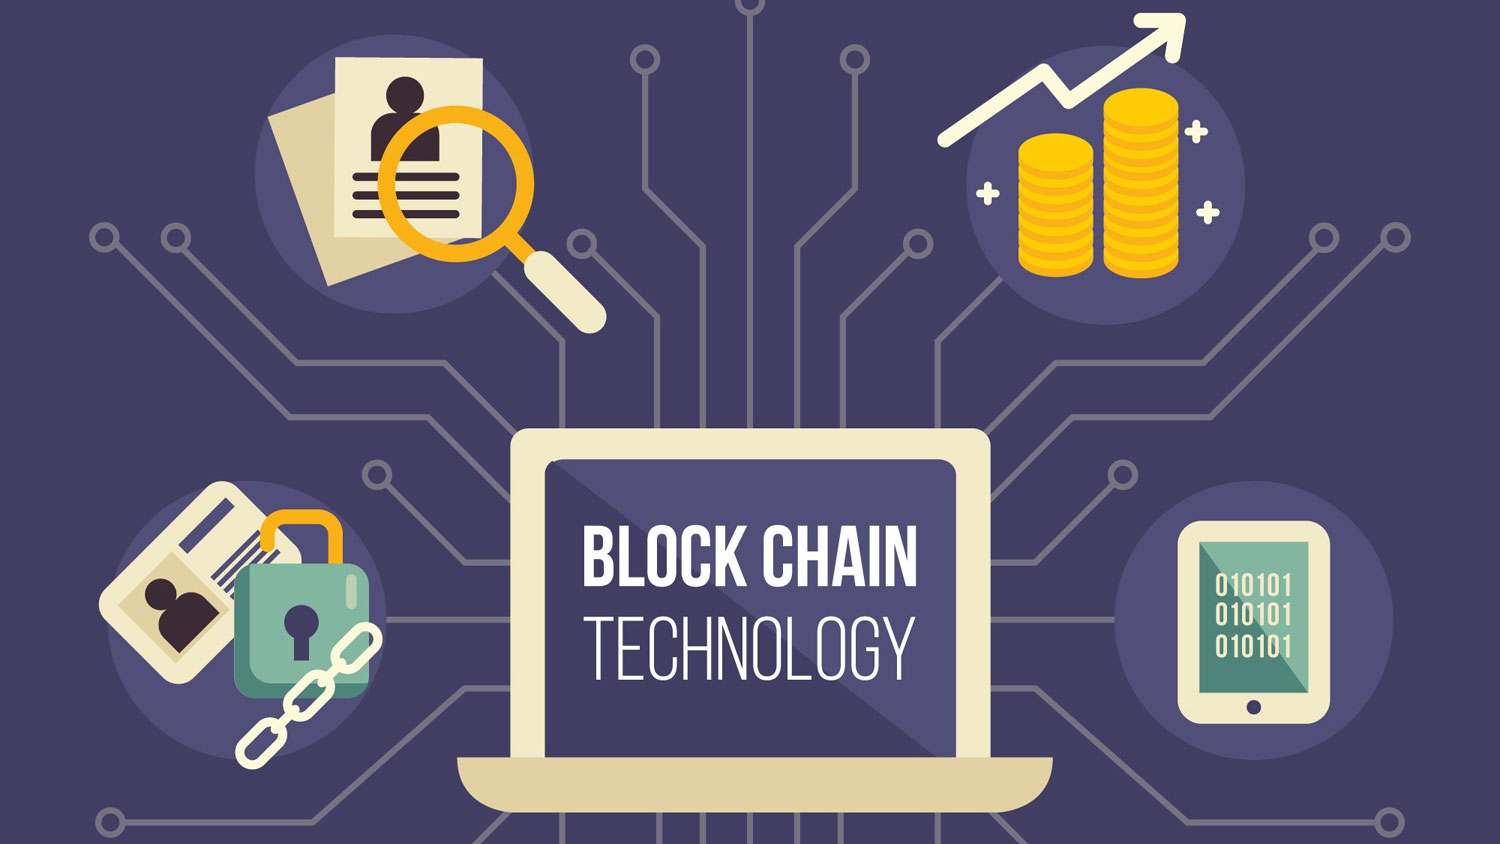 Blockchain certification course at low price - course materials free